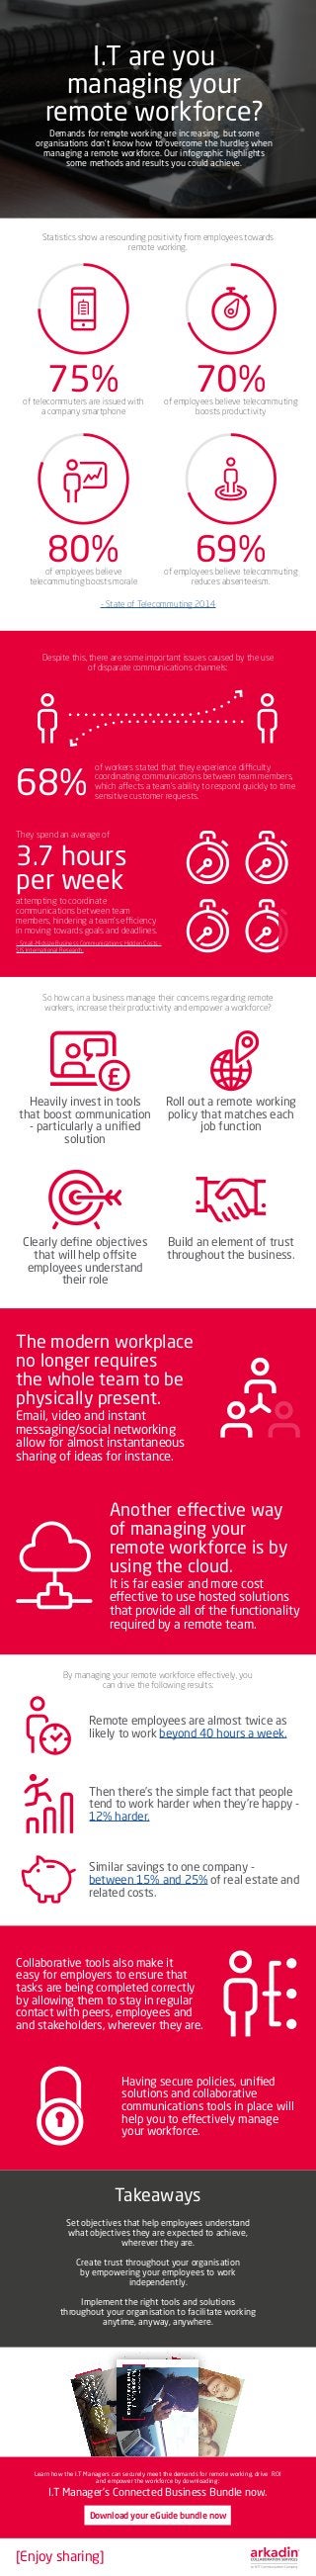 [Enjoy sharing]
Download your eGuide bundle now
I.T are you
managing your
remote workforce?
Demands for remote working are increasing, but some
organisations don’t know how to overcome the hurdles when
managing a remote workforce. Our infographic highlights
some methods and results you could achieve.
Statistics show a resounding positivity from employees towards
remote working.
Despite this, there are some important issues caused by the use
of disparate communications channels:
- State of Telecommuting 2014
of telecommuters are issued with
a company smartphone
of employees believe
telecommuting boosts morale
of employees believe telecommuting
boosts productivity
of employees believe telecommuting
reduces absenteeism.
75%
80%
They spend an average of
attempting to coordinate
communications between team
members, hindering a team’s efficiency
in moving towards goals and deadlines.
- Small-Midsize Business Communications: Hidden Costs –
SIS International Research.
3.7 hours
per week
of workers stated that they experience difficulty
coordinating communications between team members,
which affects a team’s ability to respond quickly to time
sensitive customer requests.
68%
70%
69%
So how can a business manage their concerns regarding remote
workers, increase their productivity and empower a workforce?
By managing your remote workforce effectively, you
can drive the following results:
Heavily invest in tools
that boost communication
- particularly a unified
solution
Remote employees are almost twice as
likely to work beyond 40 hours a week.
Then there’s the simple fact that people
tend to work harder when they’re happy -
12% harder.
Similar savings to one company -
between 15% and 25% of real estate and
related costs.
Clearly define objectives
that will help offsite
employees understand
their role
Roll out a remote working
policy that matches each
job function
Build an element of trust
throughout the business.
£
The modern workplace
no longer requires
the whole team to be
physically present.
Email, video and instant
messaging/social networking
allow for almost instantaneous
sharing of ideas for instance.
Another effective way
of managing your
remote workforce is by
using the cloud.
It is far easier and more cost
effective to use hosted solutions
that provide all of the functionality
required by a remote team.
Collaborative tools also make it
easy for employers to ensure that
tasks are being completed correctly
by allowing them to stay in regular
contact with peers, employees and
and stakeholders, wherever they are.
Having secure policies, unified
solutions and collaborative
communications tools in place will
help you to effectively manage
your workforce.
Set objectives that help employees understand
what objectives they are expected to achieve,
wherever they are.
Create trust throughout your organisation
by empowering your employees to work
independently.
Implement the right tools and solutions
throughout your organisation to facilitate working
anytime, anyway, anywhere.
Takeaways
Learn how the I.T Managers can securely meet the demands for remote working, drive ROI
and empower the workforce by downloading:
I.T Manager’s Connected Business Bundle now.
 